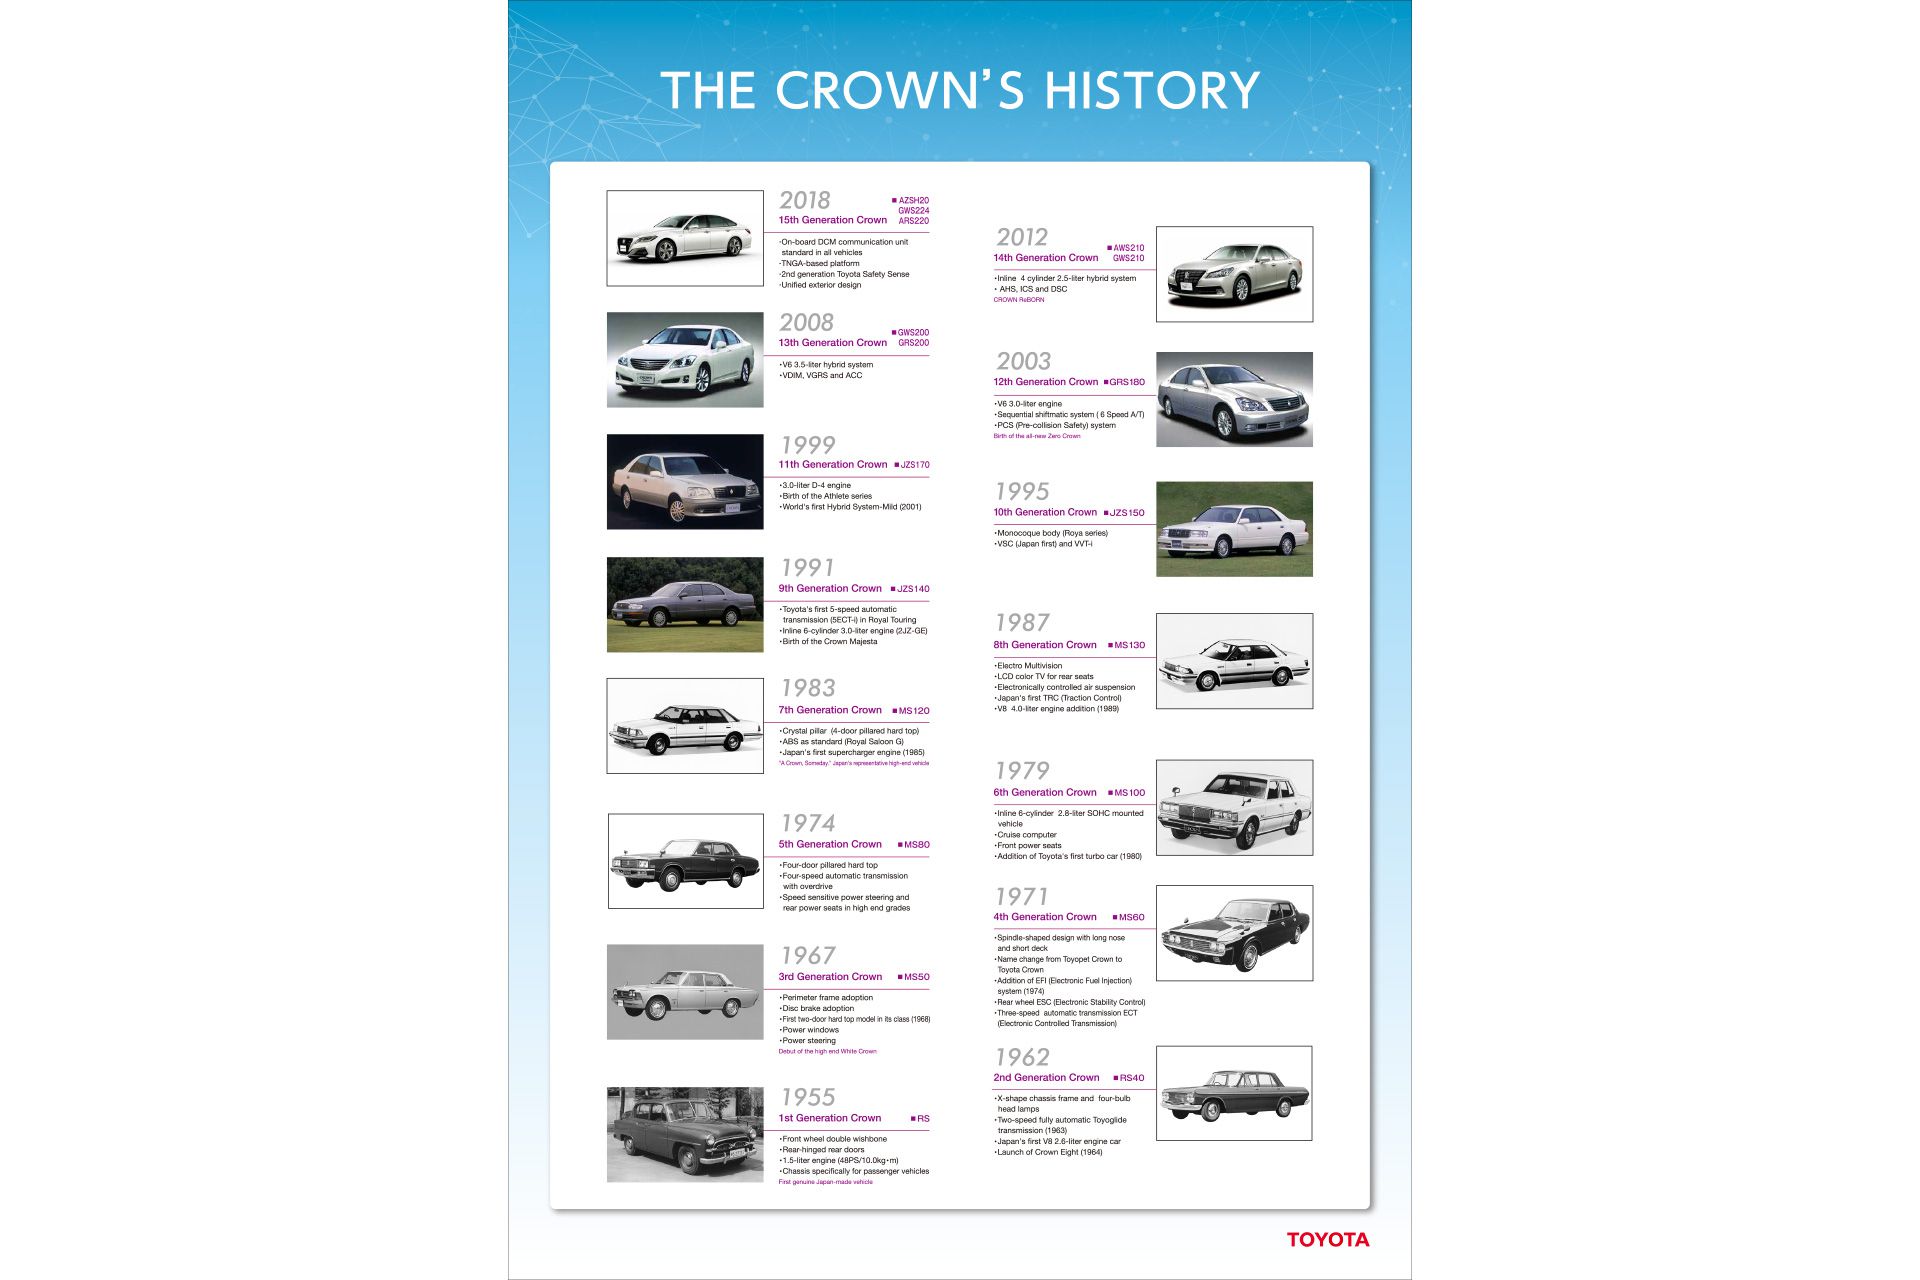 THE CROWN'S HISTORY